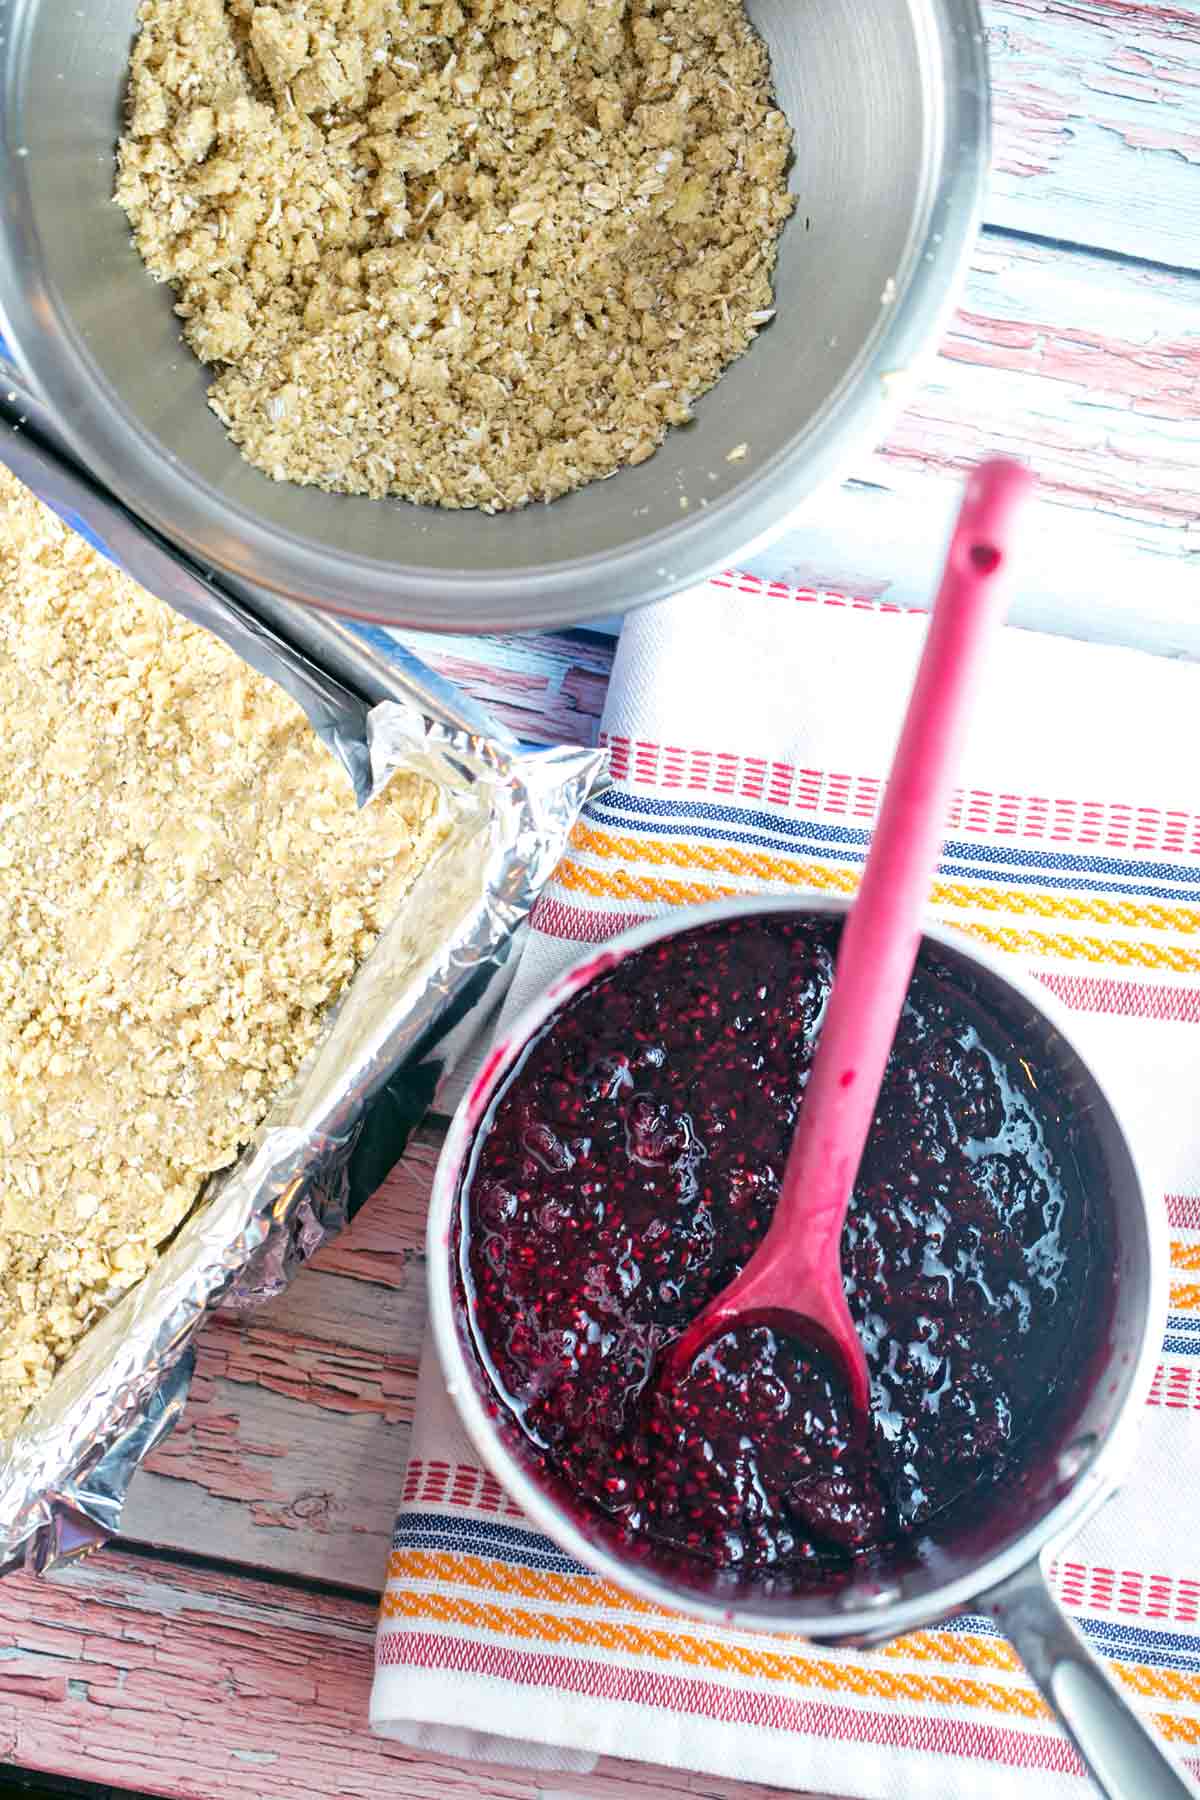 homemade berry jam next to a mixing bowl filled with oatmeal crumble